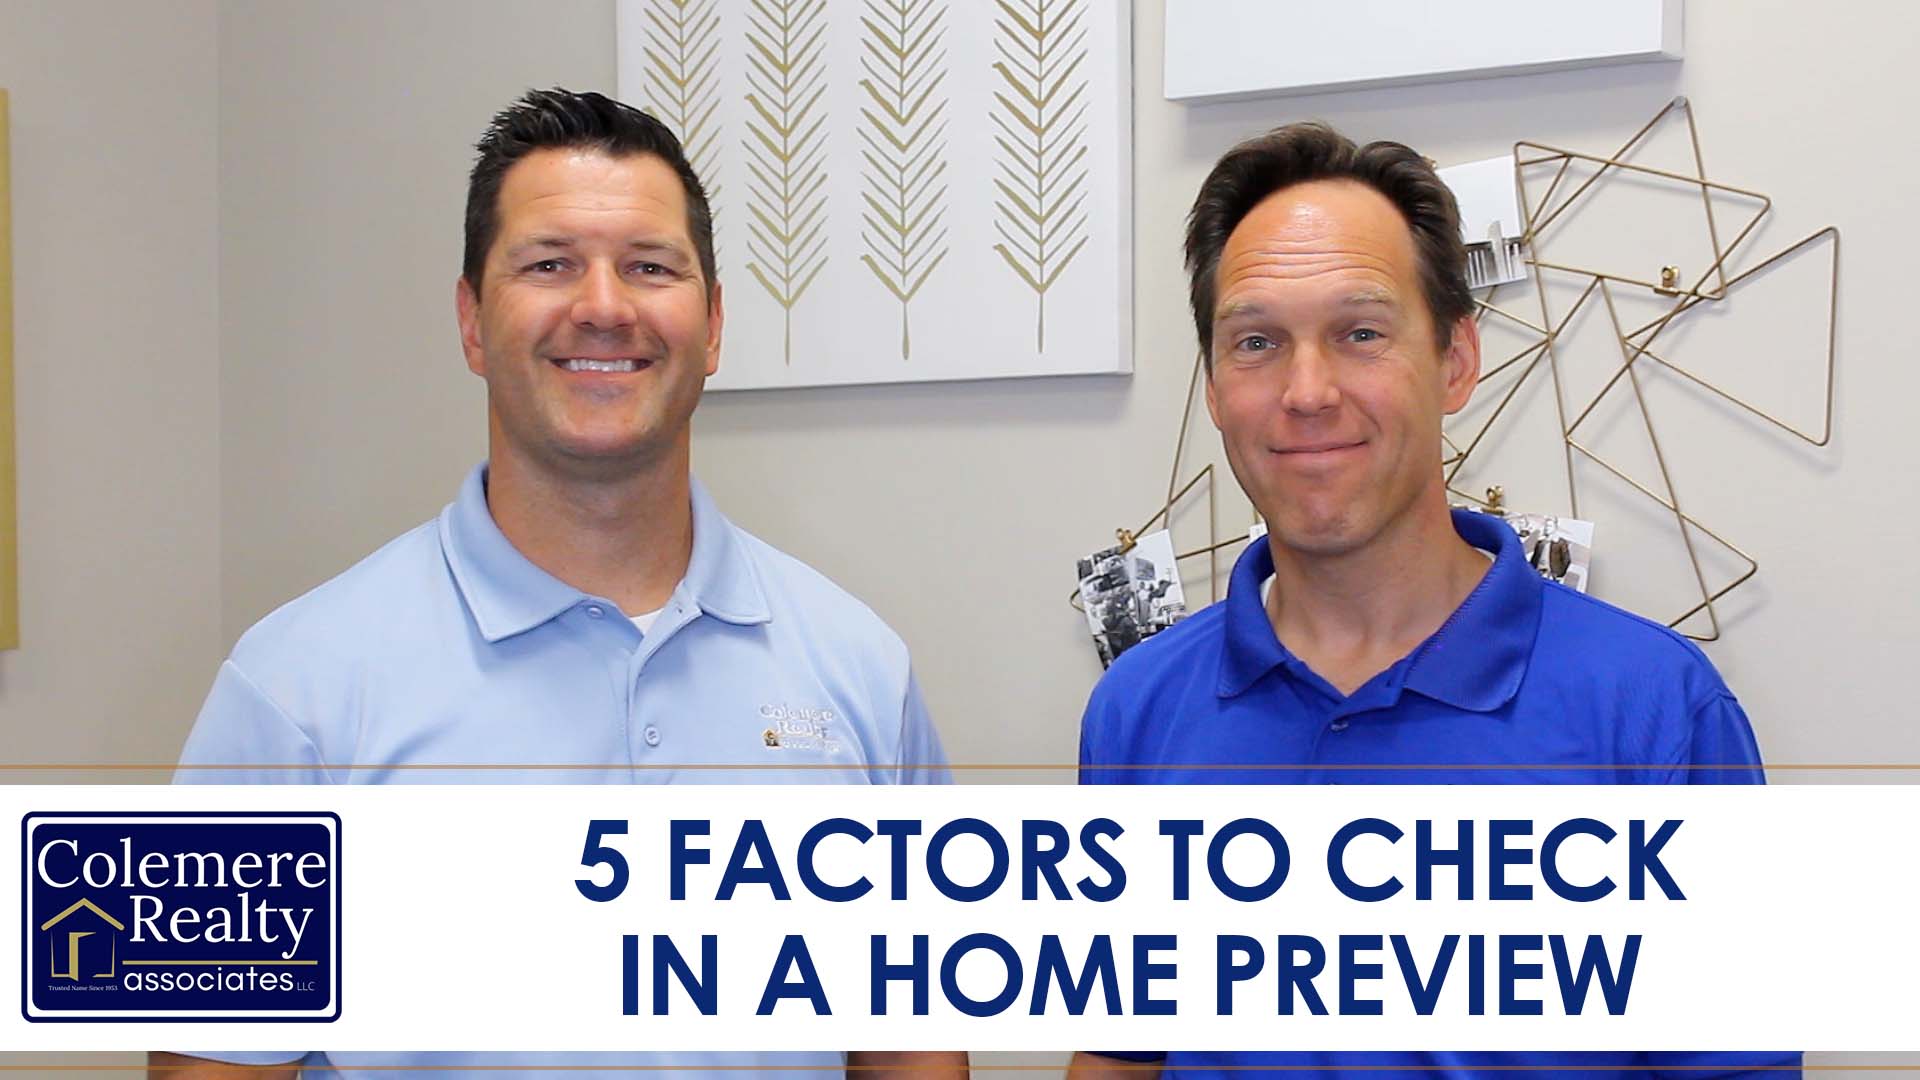 Check These Key Factors When You Preview a Home